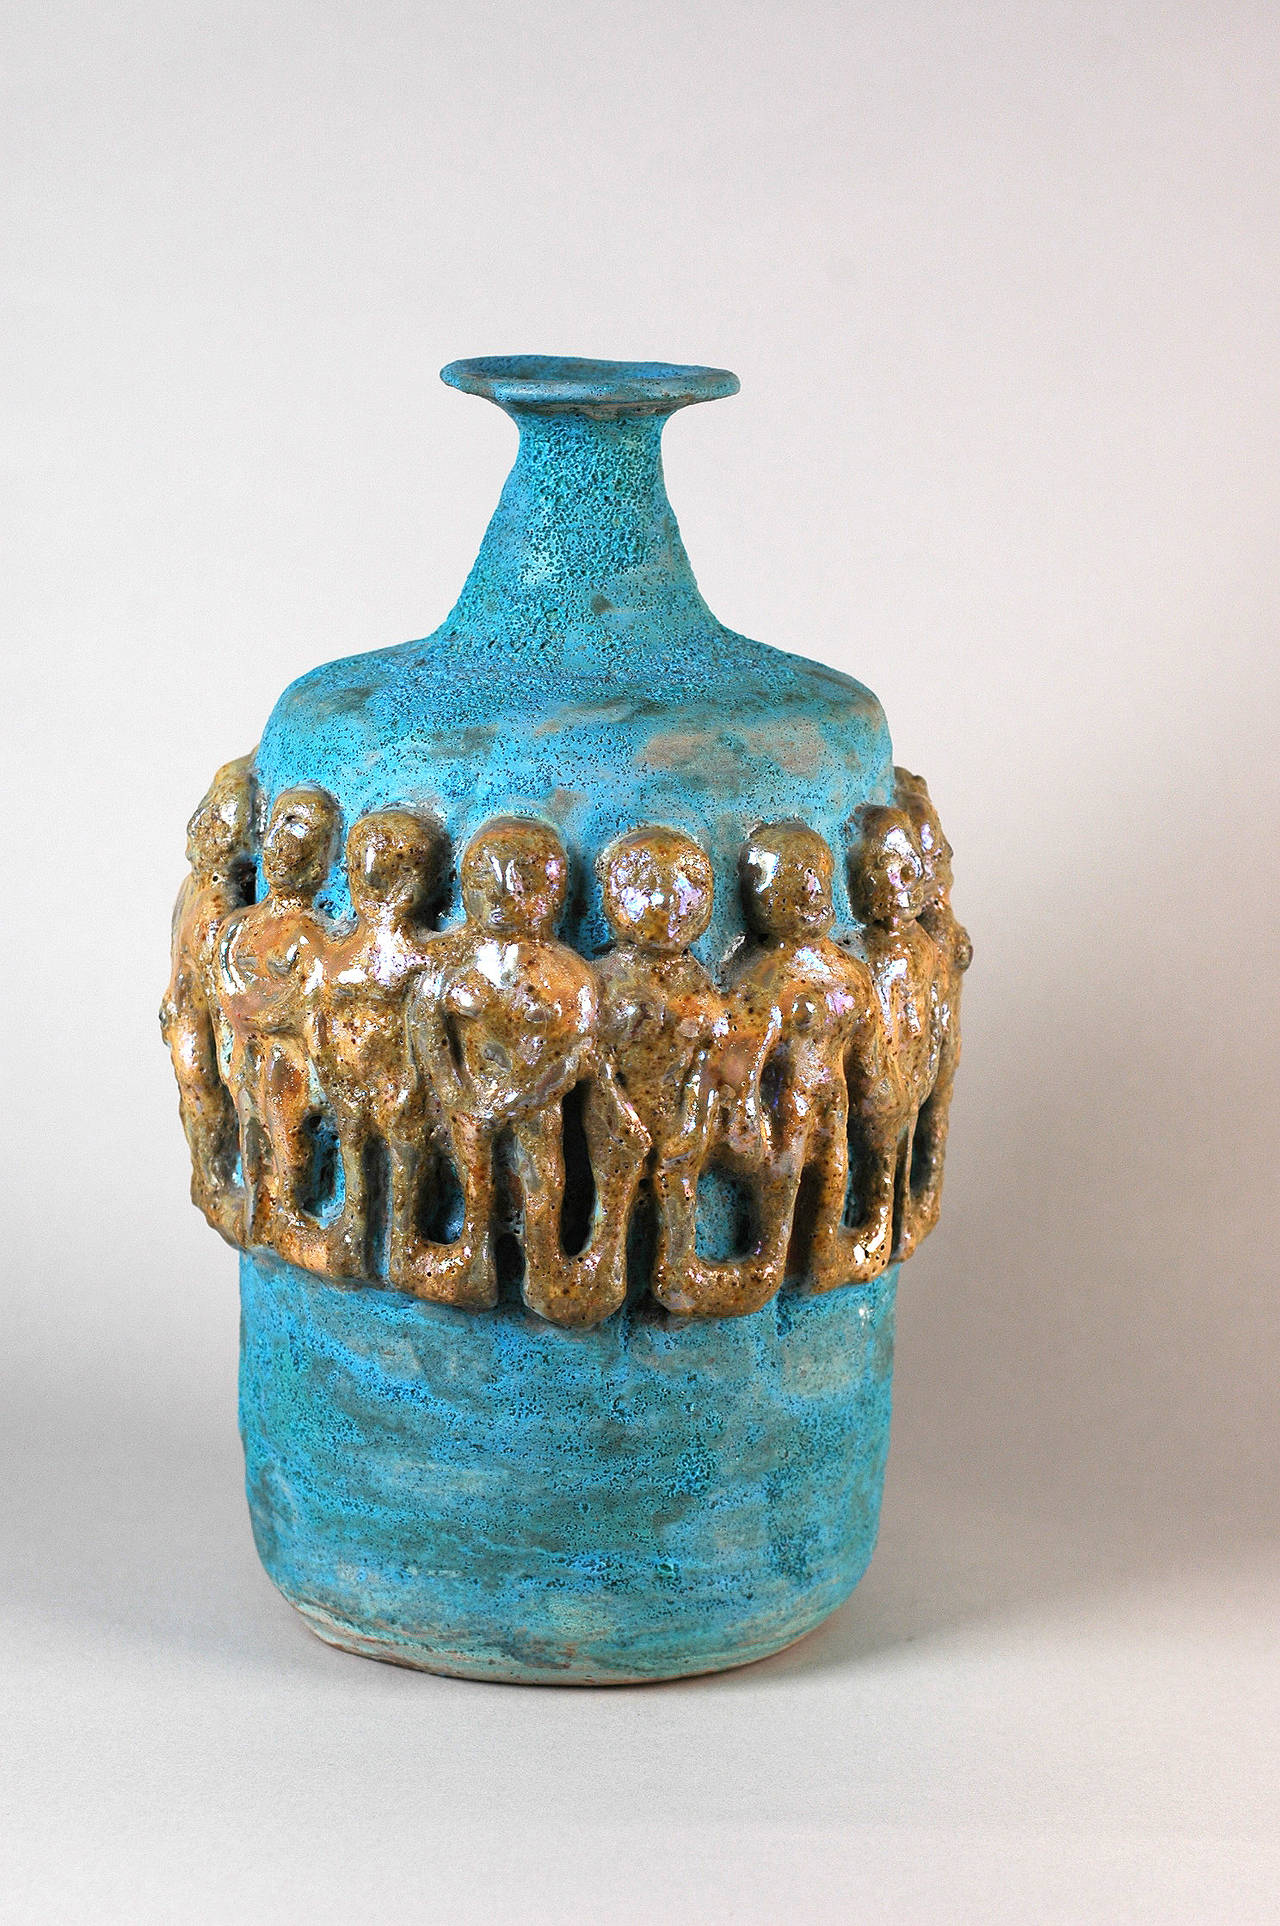 Beatrice Wood Figurative Sculpture - Matte Turquoise Bottle with Gold Lustre Figures